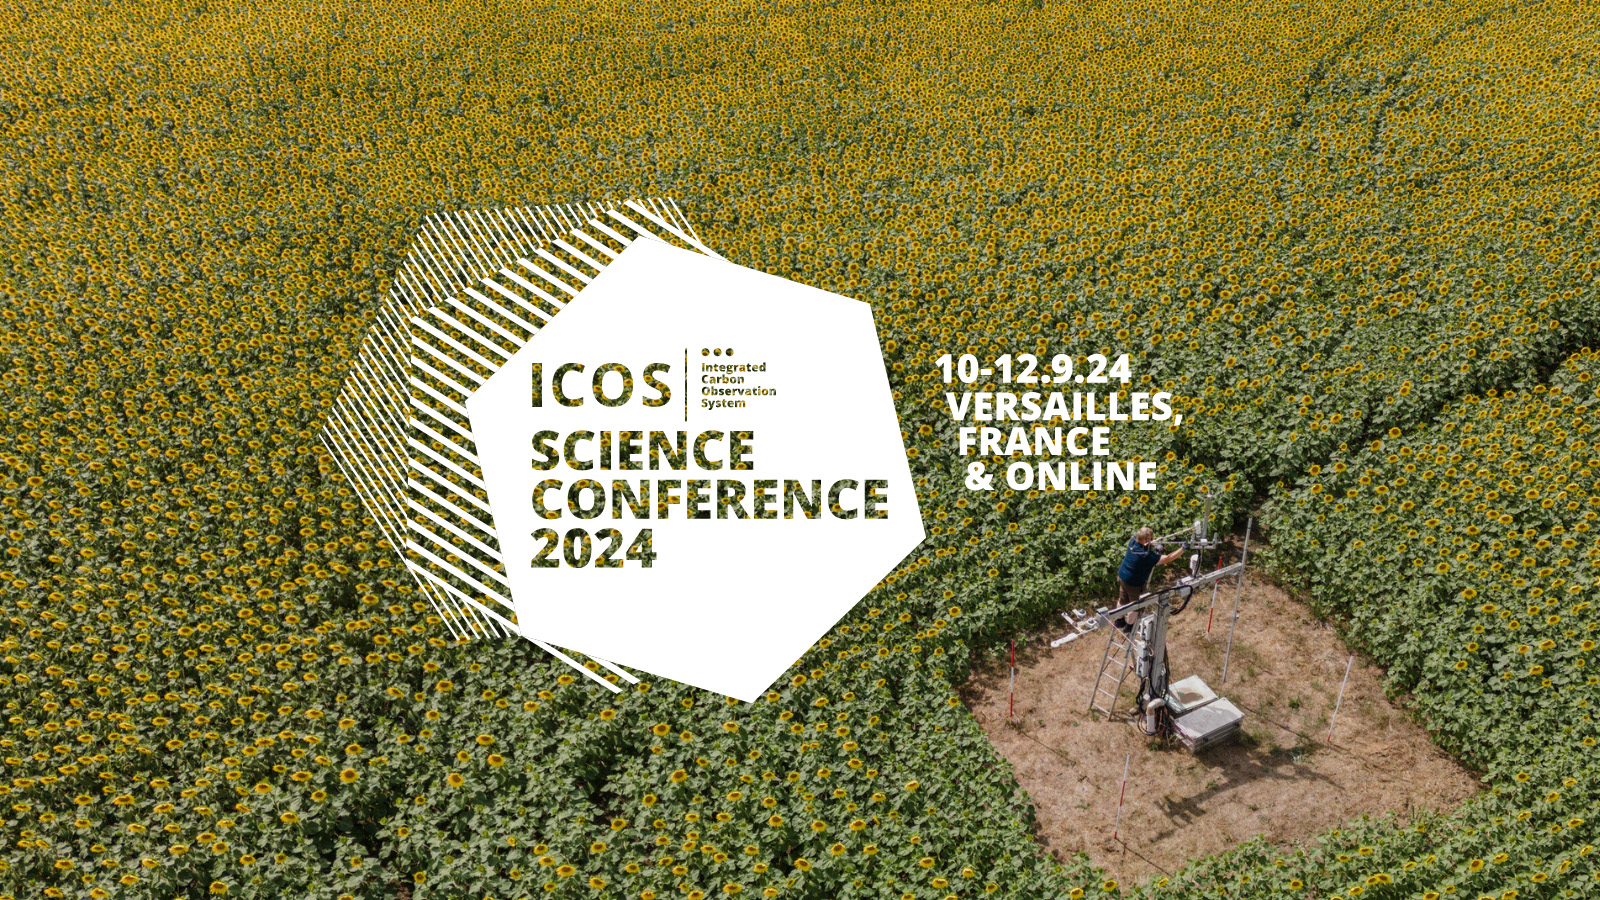 ICOS Science Conference 2024